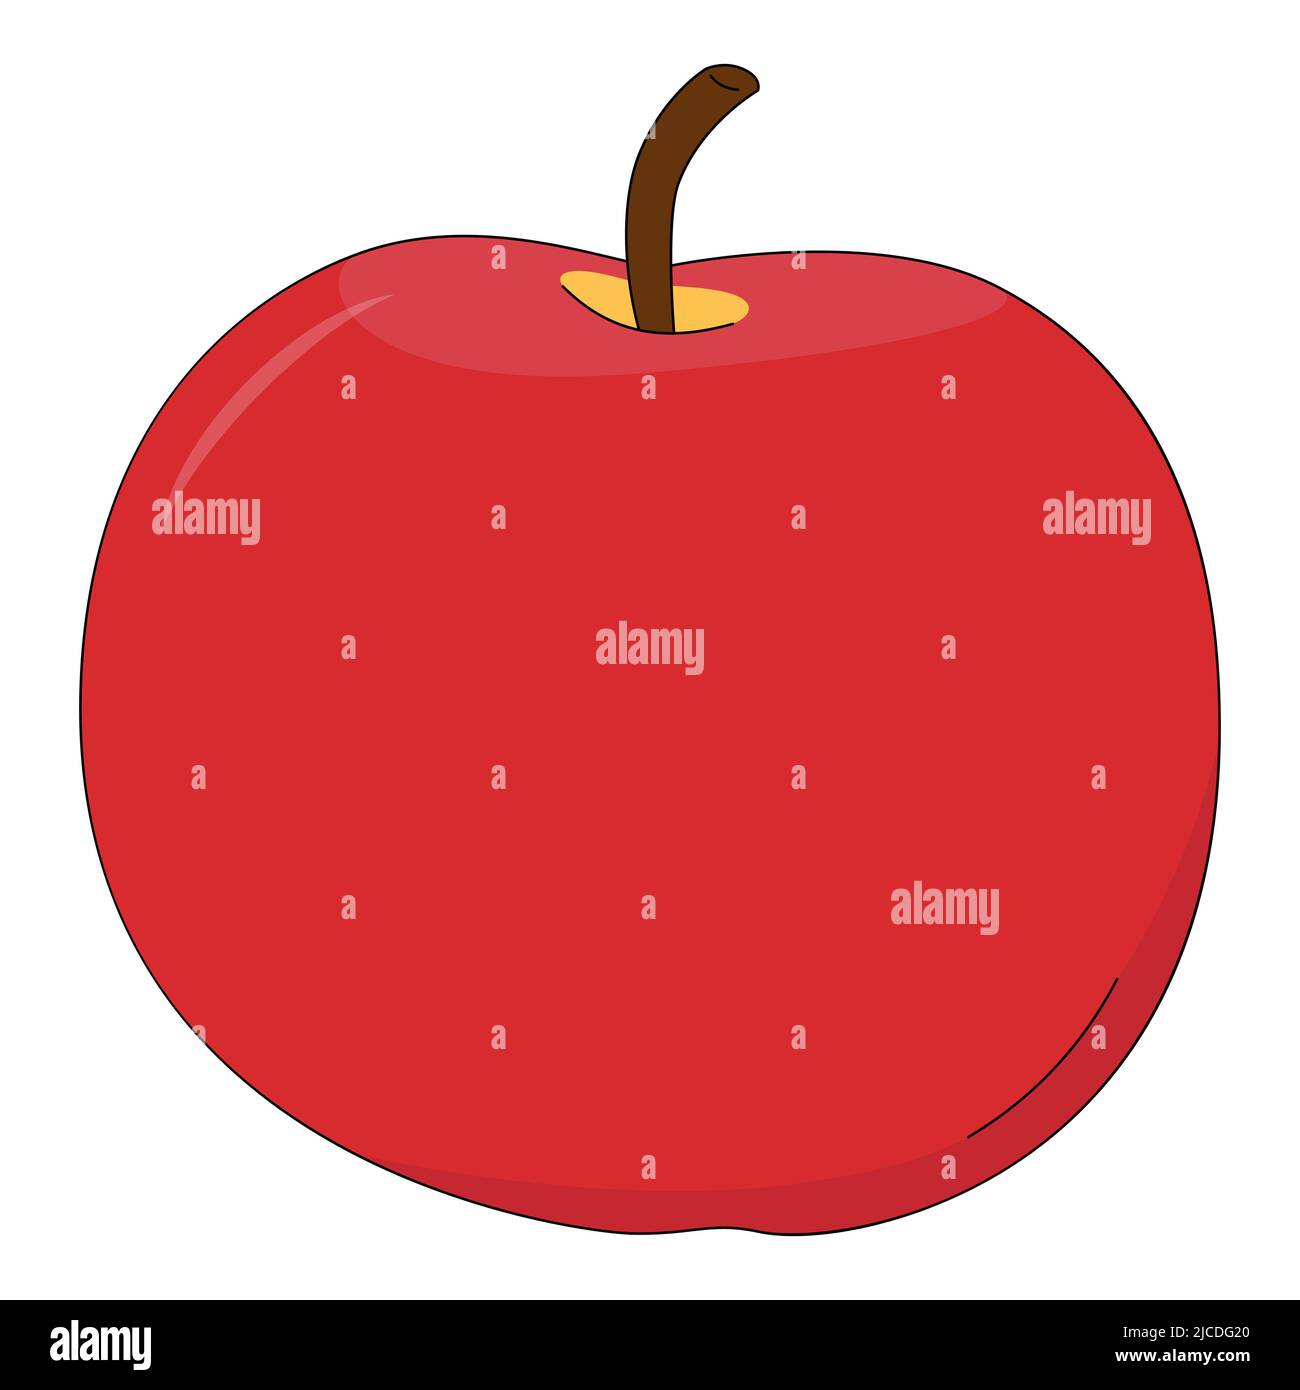 Vector illustration of apple. Fruit in cartoon style isolated on white background Stock Vector